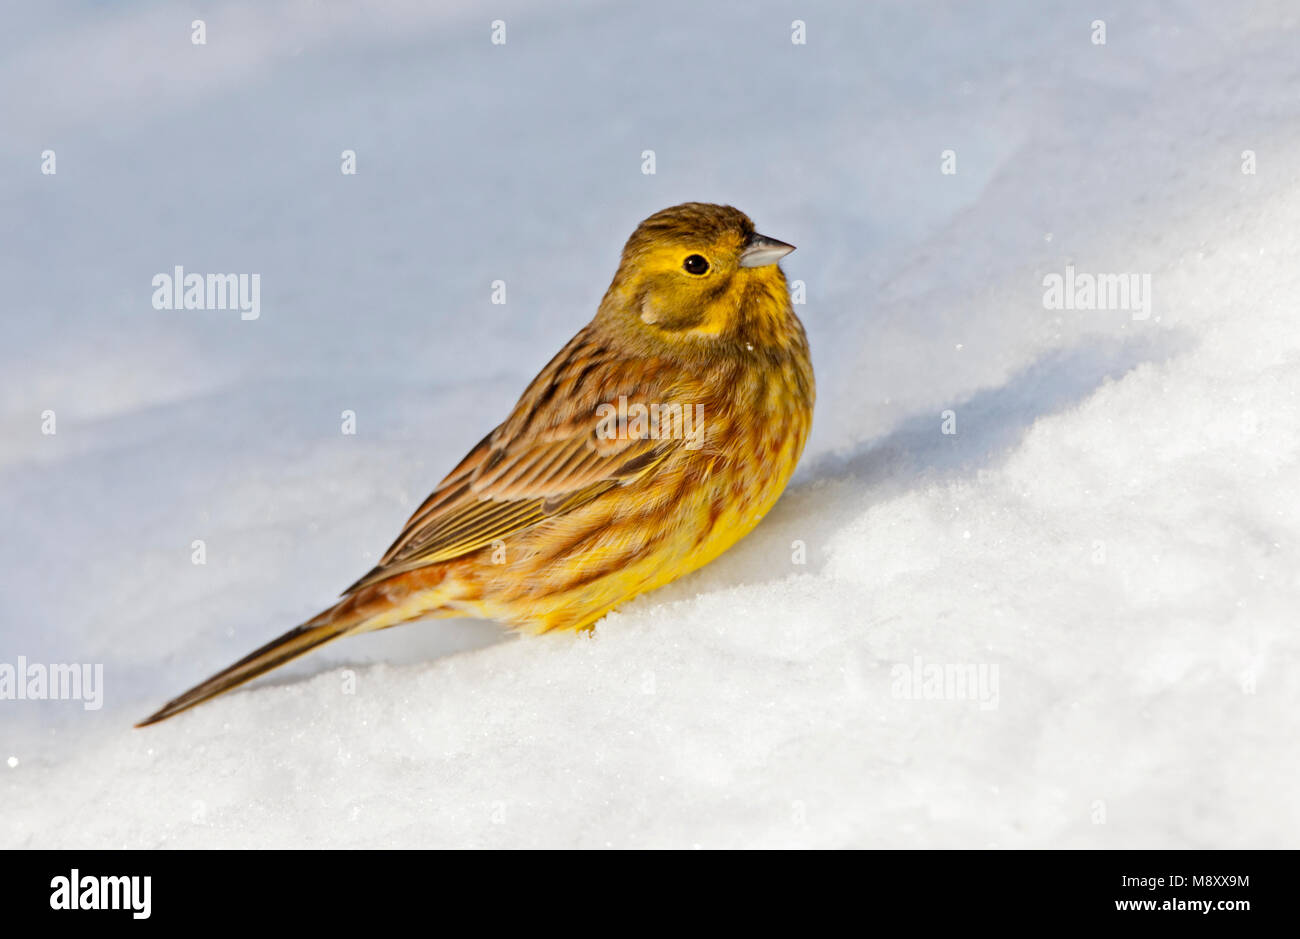 Geelgors zittend in de sneeuw, Yellowhammer perched in the snow Stock Photo